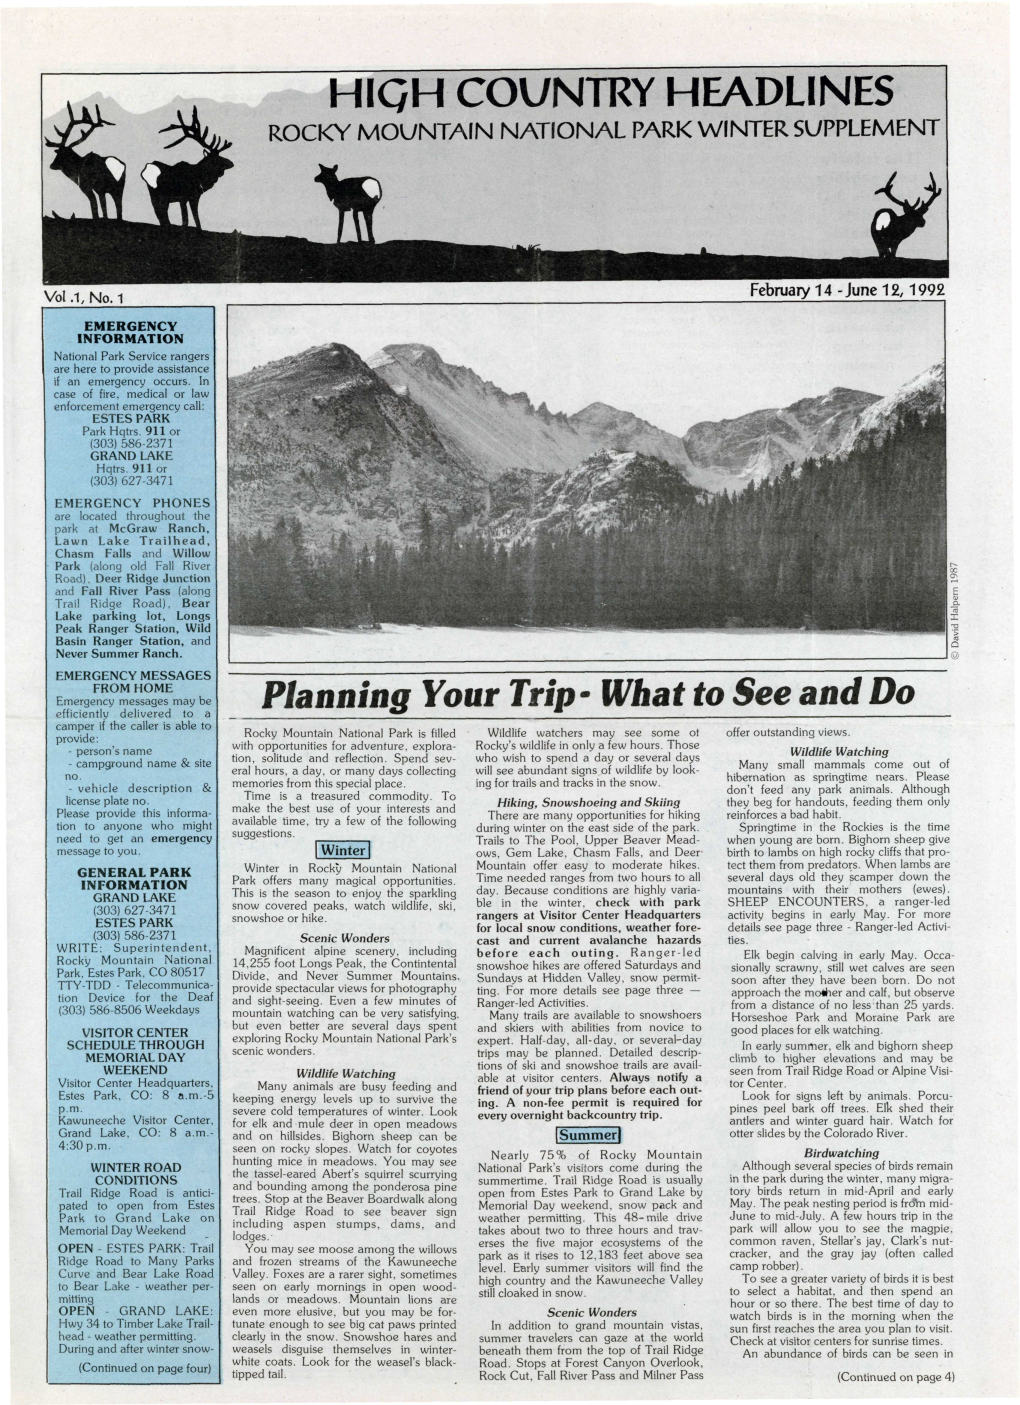 HIQH COUNTRY HEADLINES Planning Your Trip